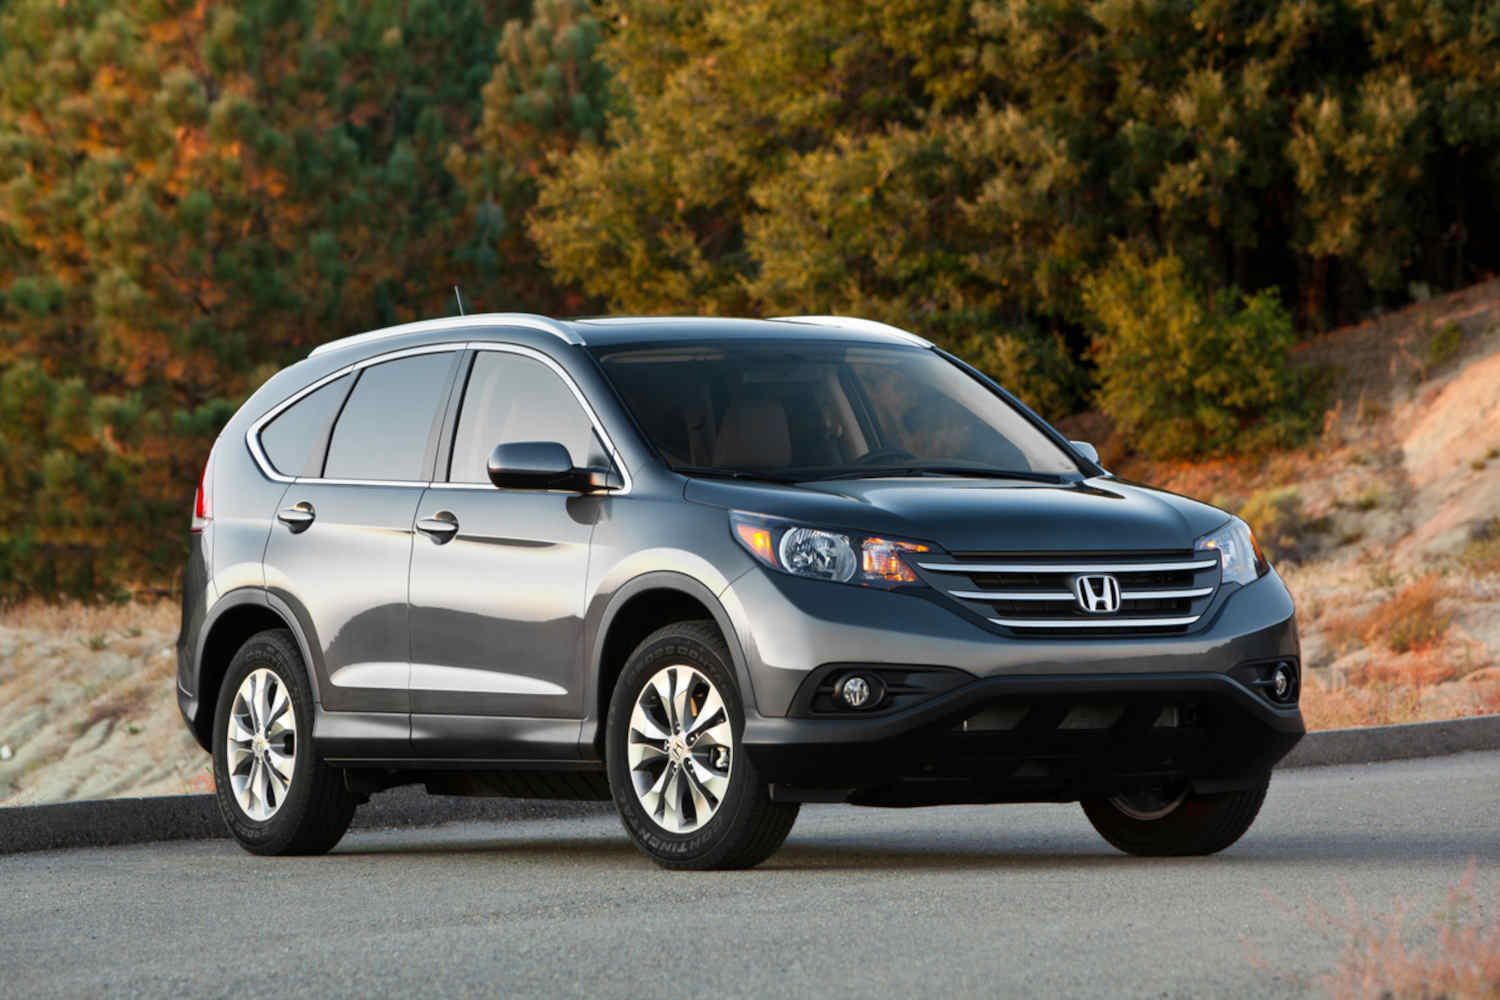 This Honda CR-V is an affordable compact SUV